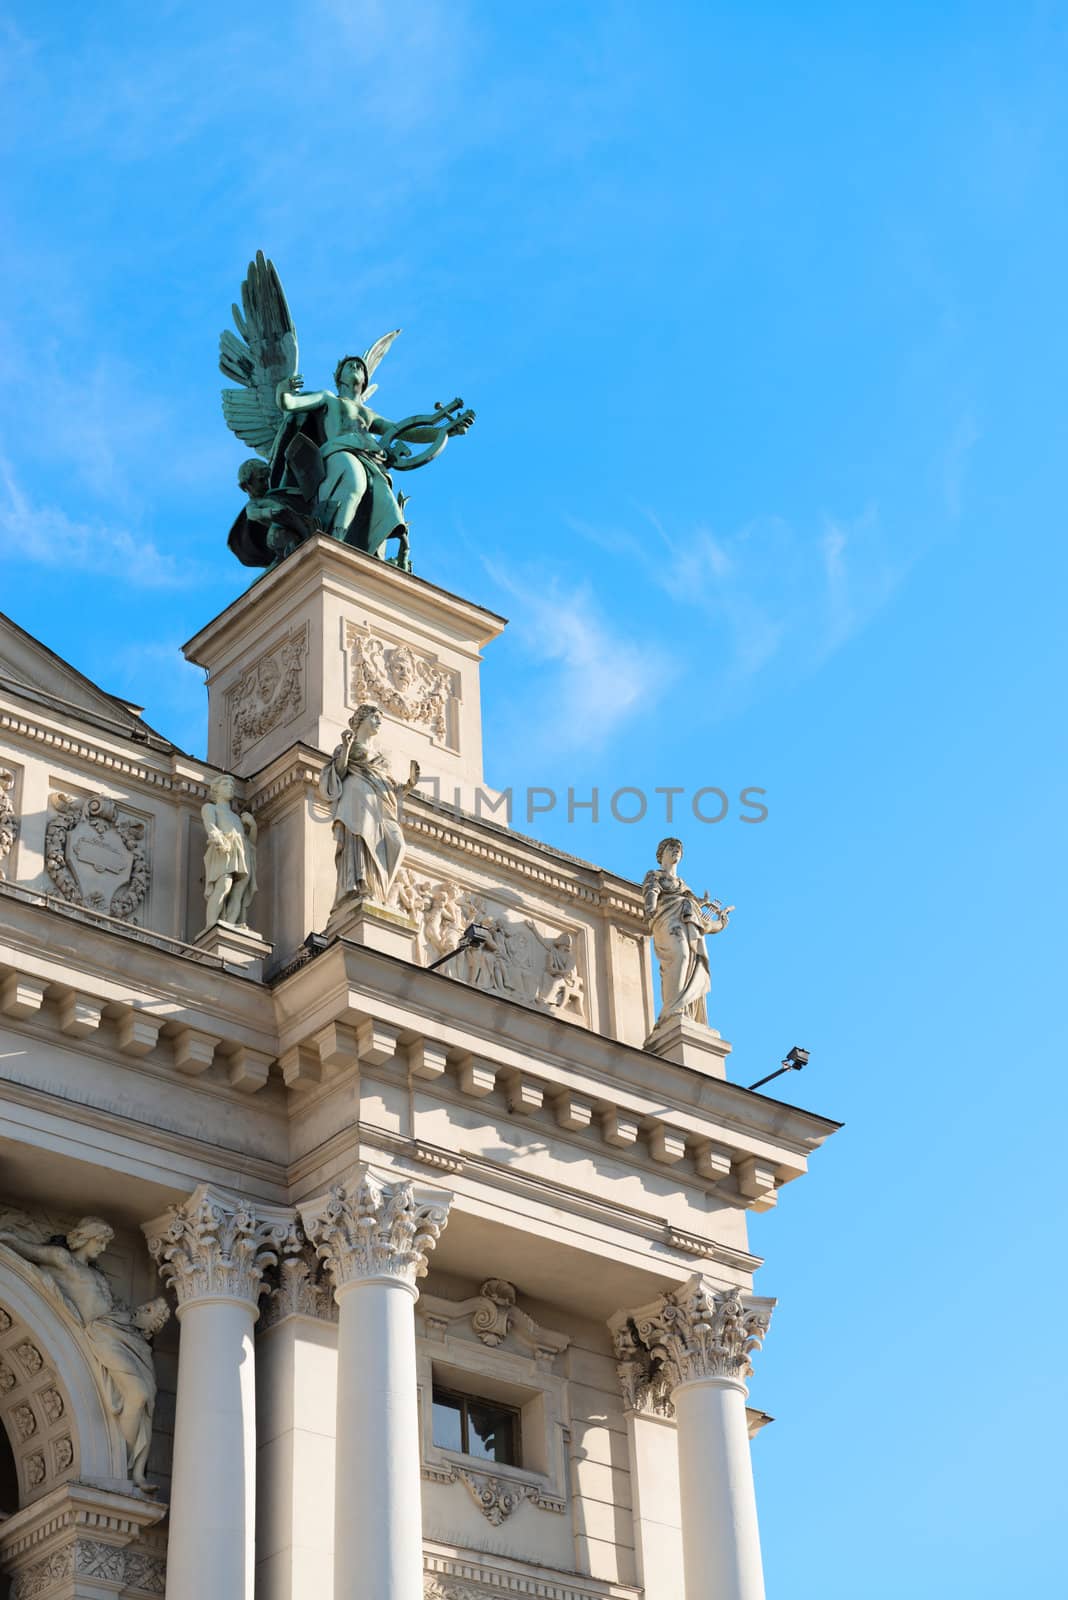 Lviv theatre of opera and ballet exterior. The symbolic sculpture of Music.